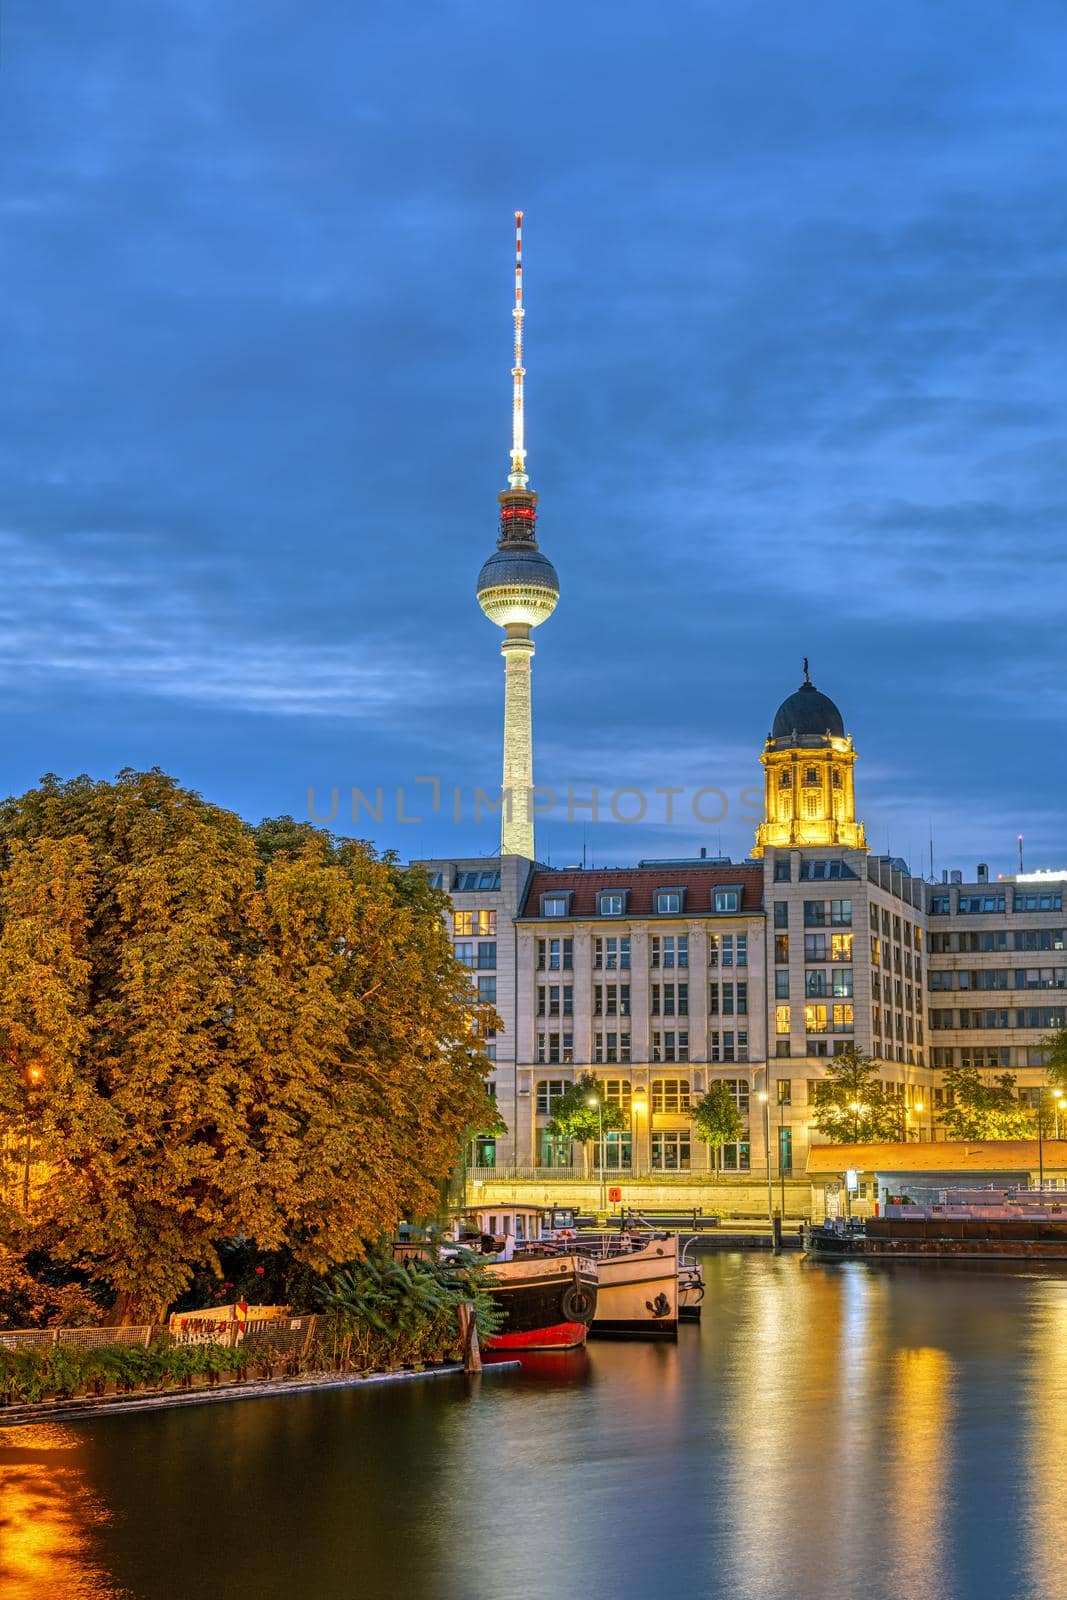 The river Spree in Berlin at night with the TV Tower in the back